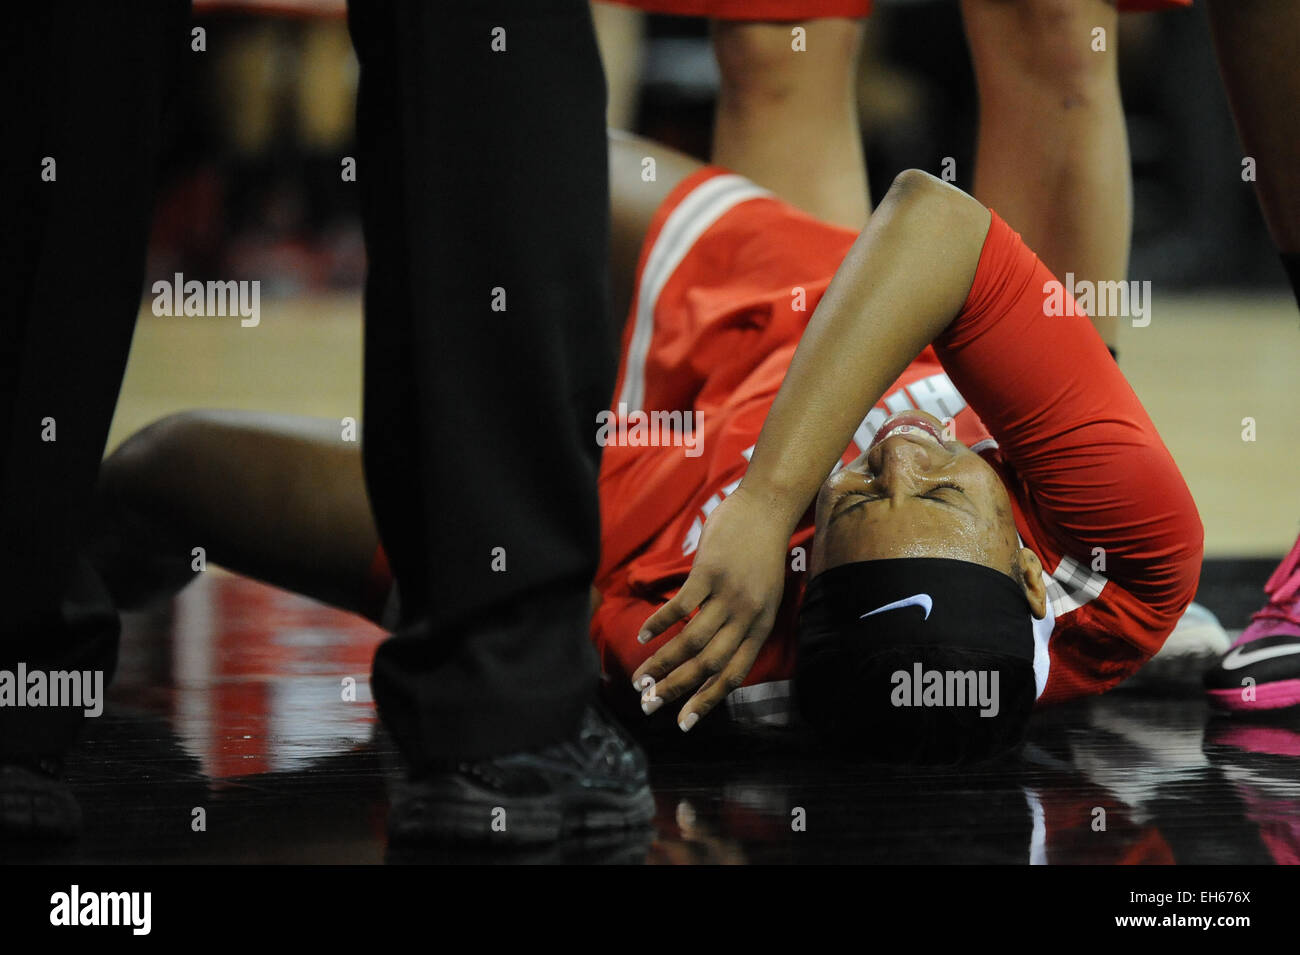 Hoffman Estates, IL, USA. 7th Mar, 2015. Ohio State Buckeyes guard Ameryst Alston (14) on the ground in pain after a play in the first half during the 2015 Big Ten Women's Basketball Tournament game between the Iowa Hawkeyes and the Ohio State Buckeyes at the Sears Centre in Hoffman Estates, IL. Patrick Gorski/CSM/Alamy Live News Stock Photo